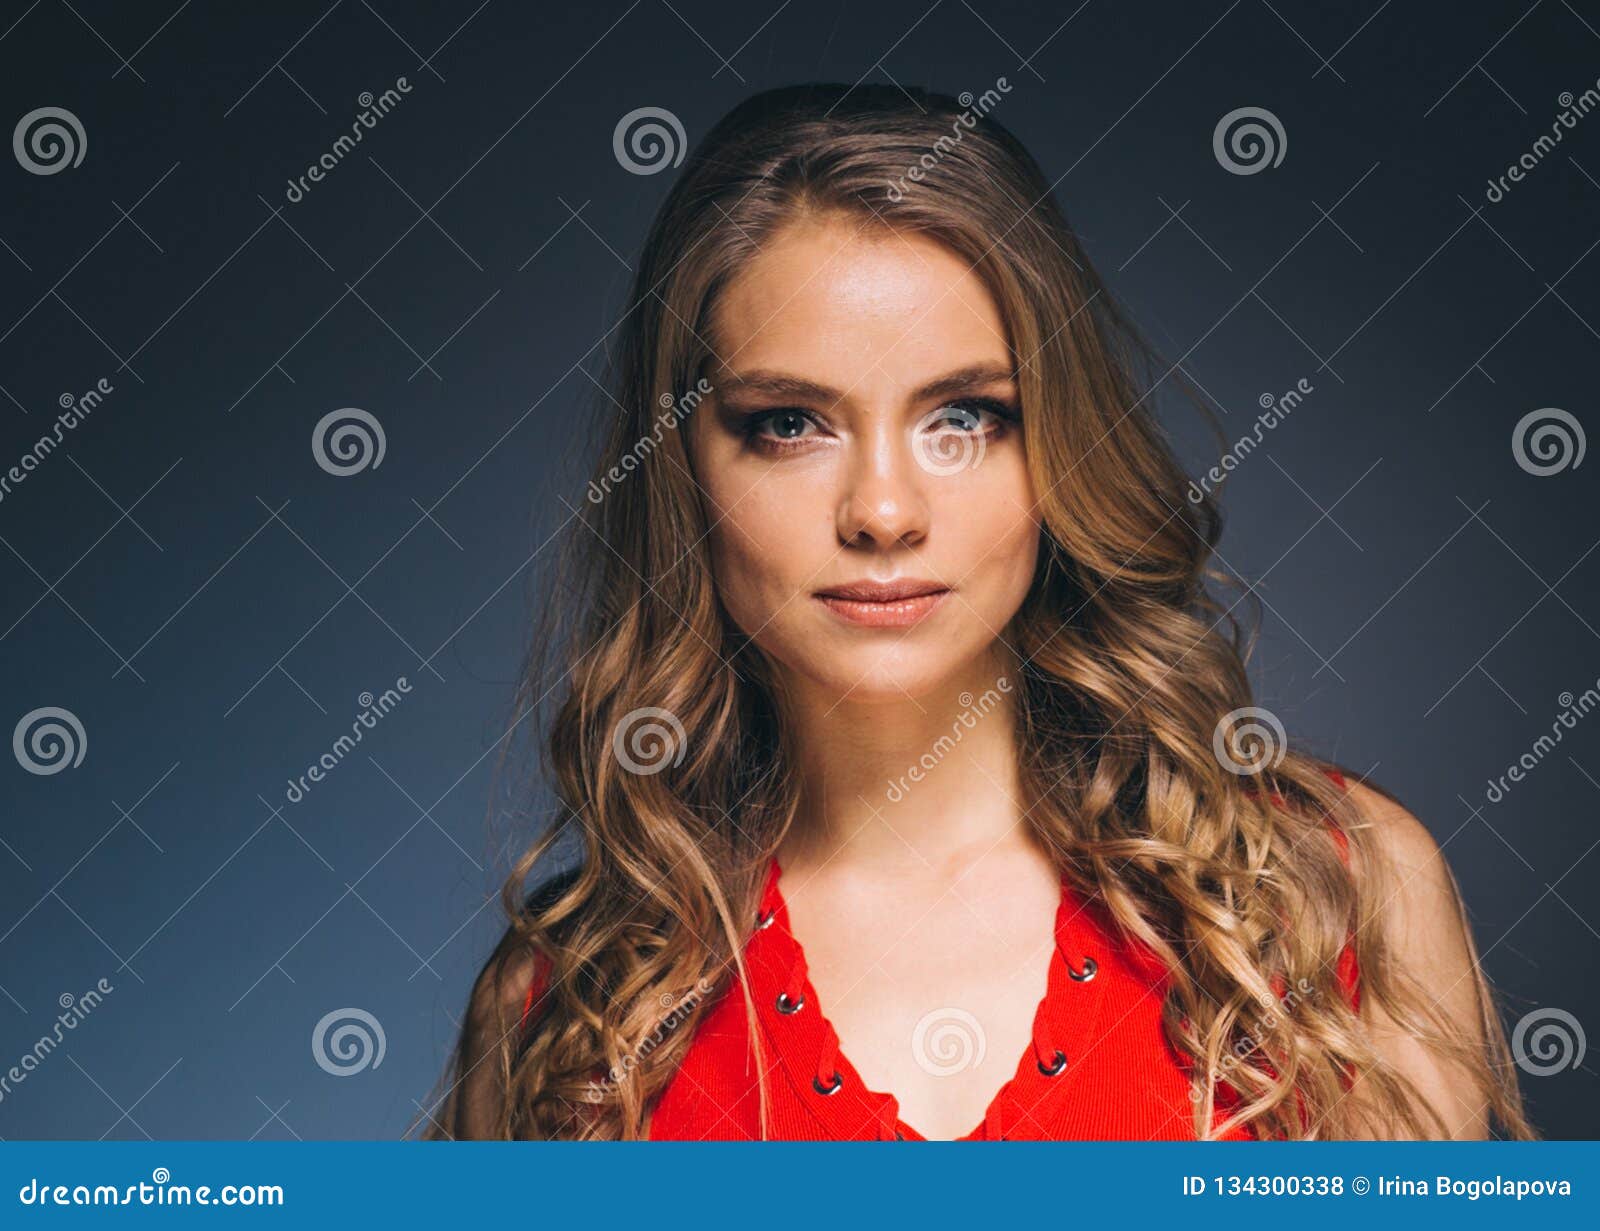 Woman in Red Dress with Long Blonde Hair Stock Photo - Image of ...